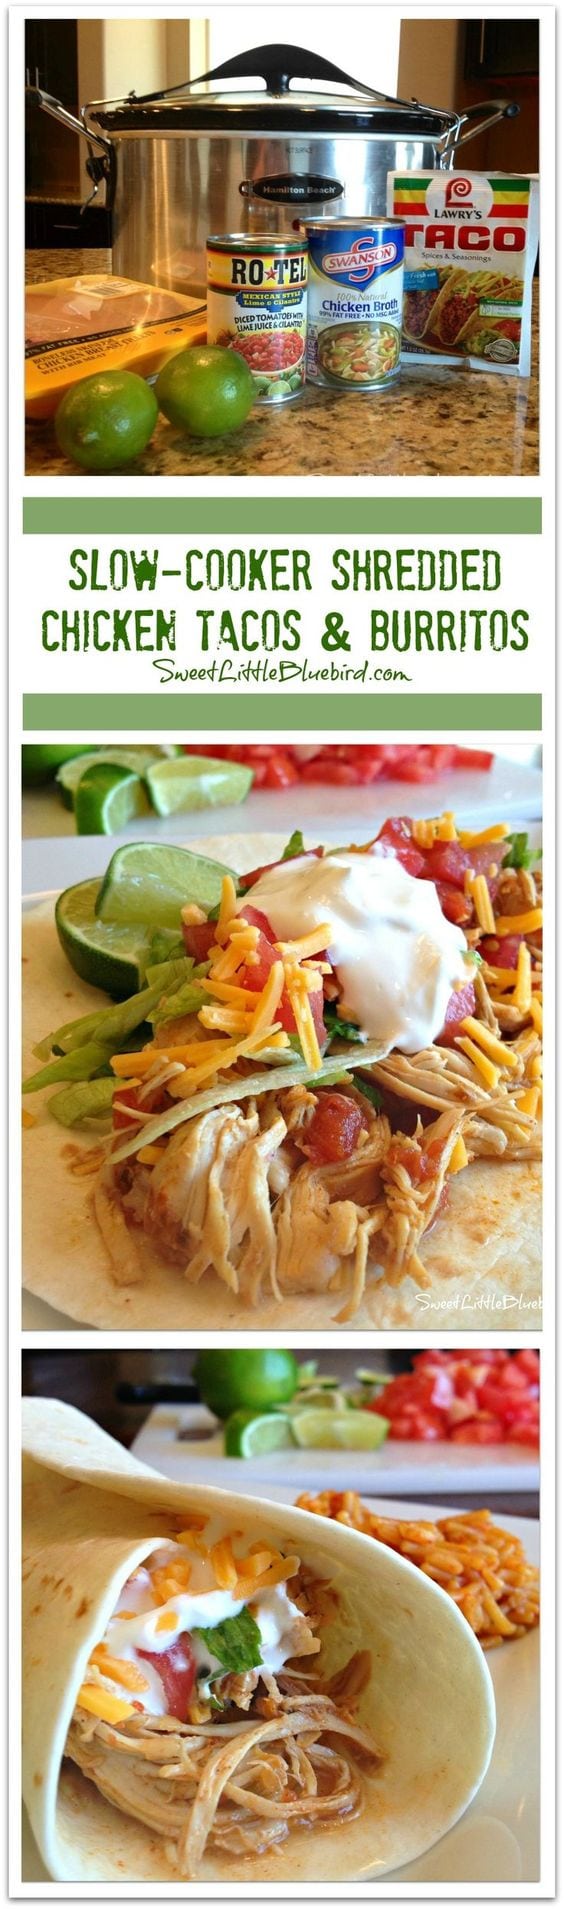 Best Slow Cooker Recipes - Shredded Chicken Tacos and Burritos